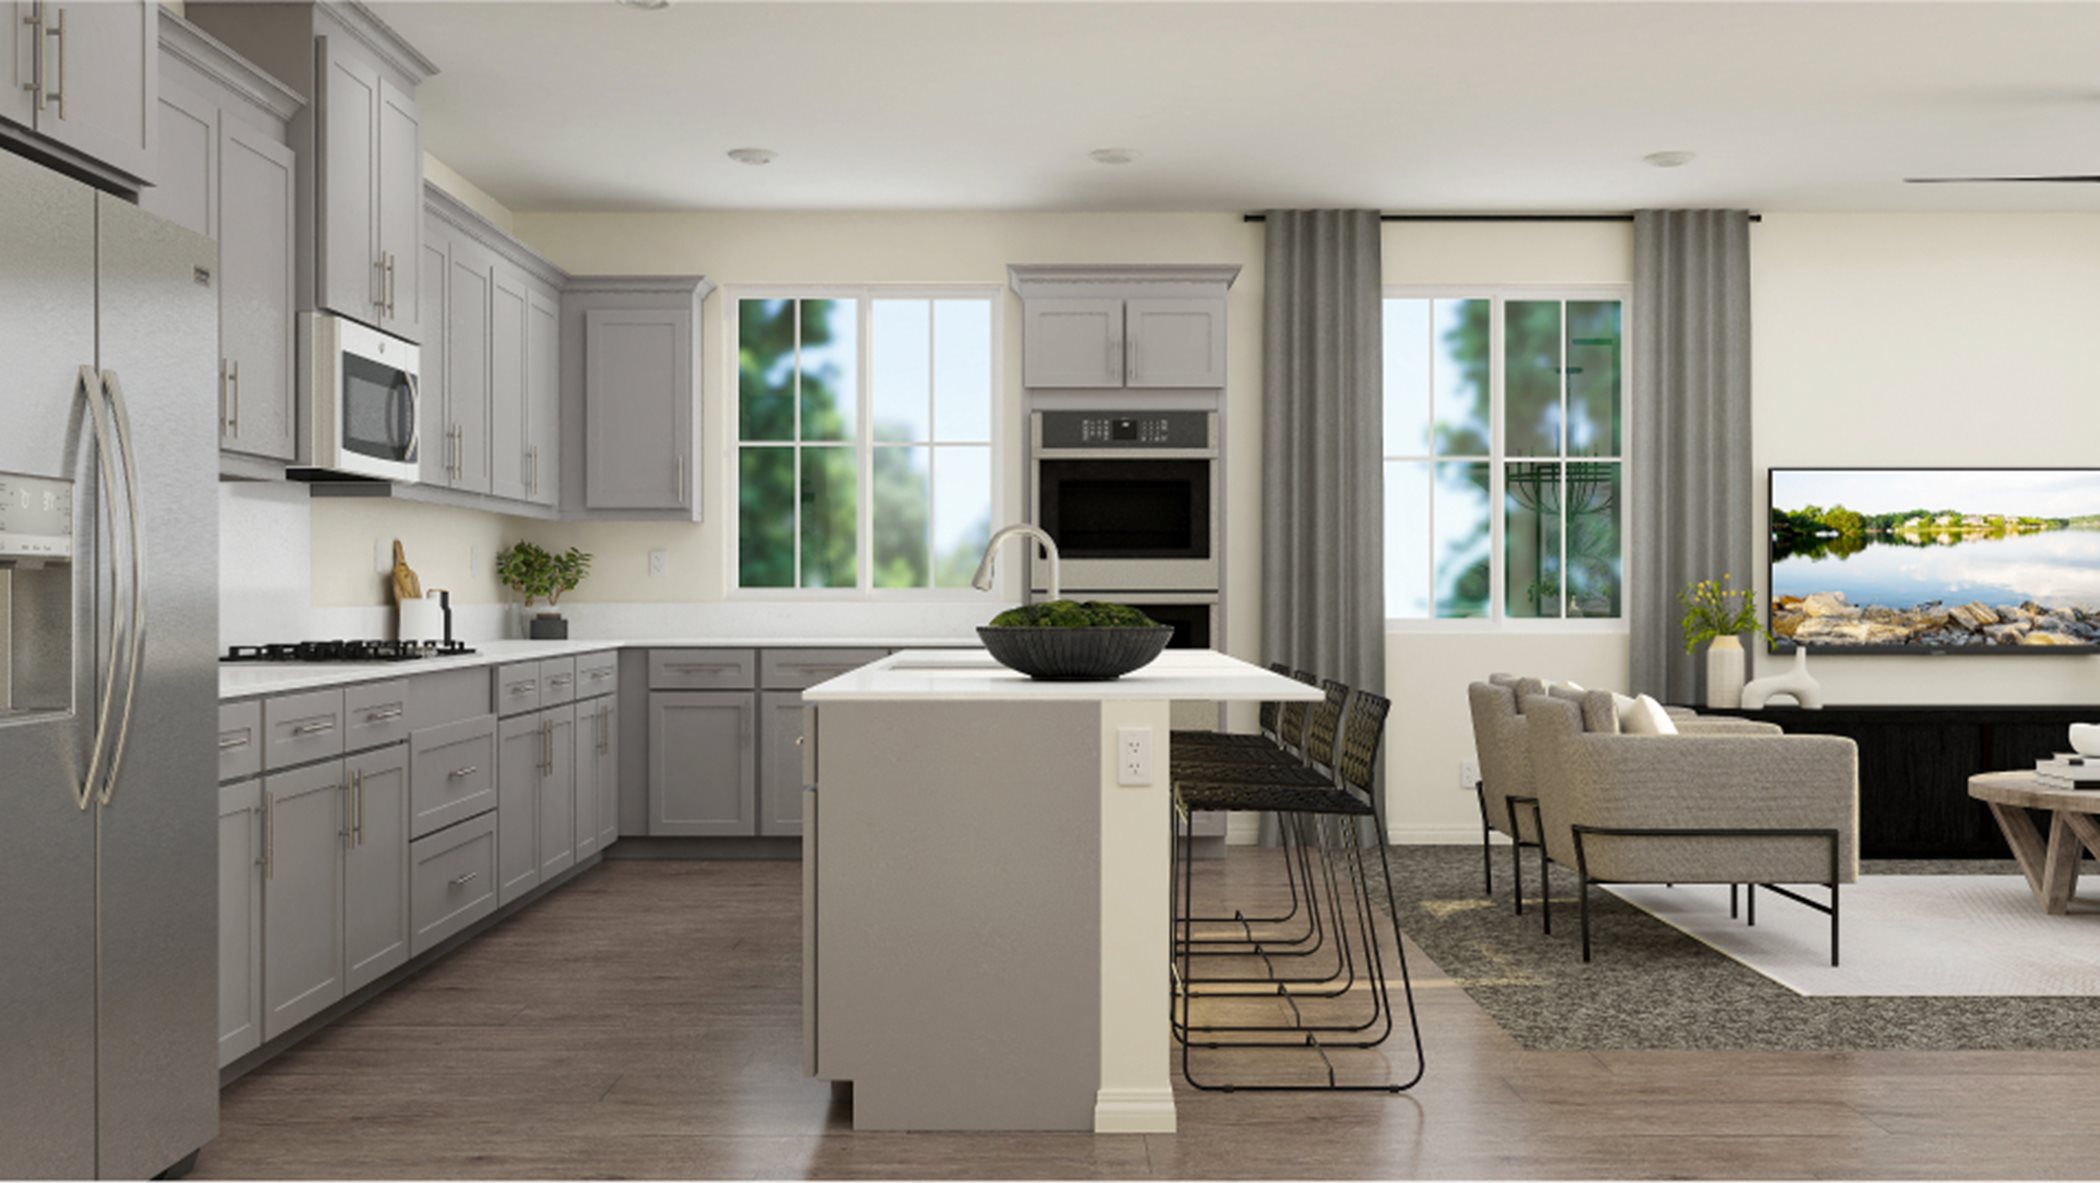 Kitchen island, cabinets, and appliances